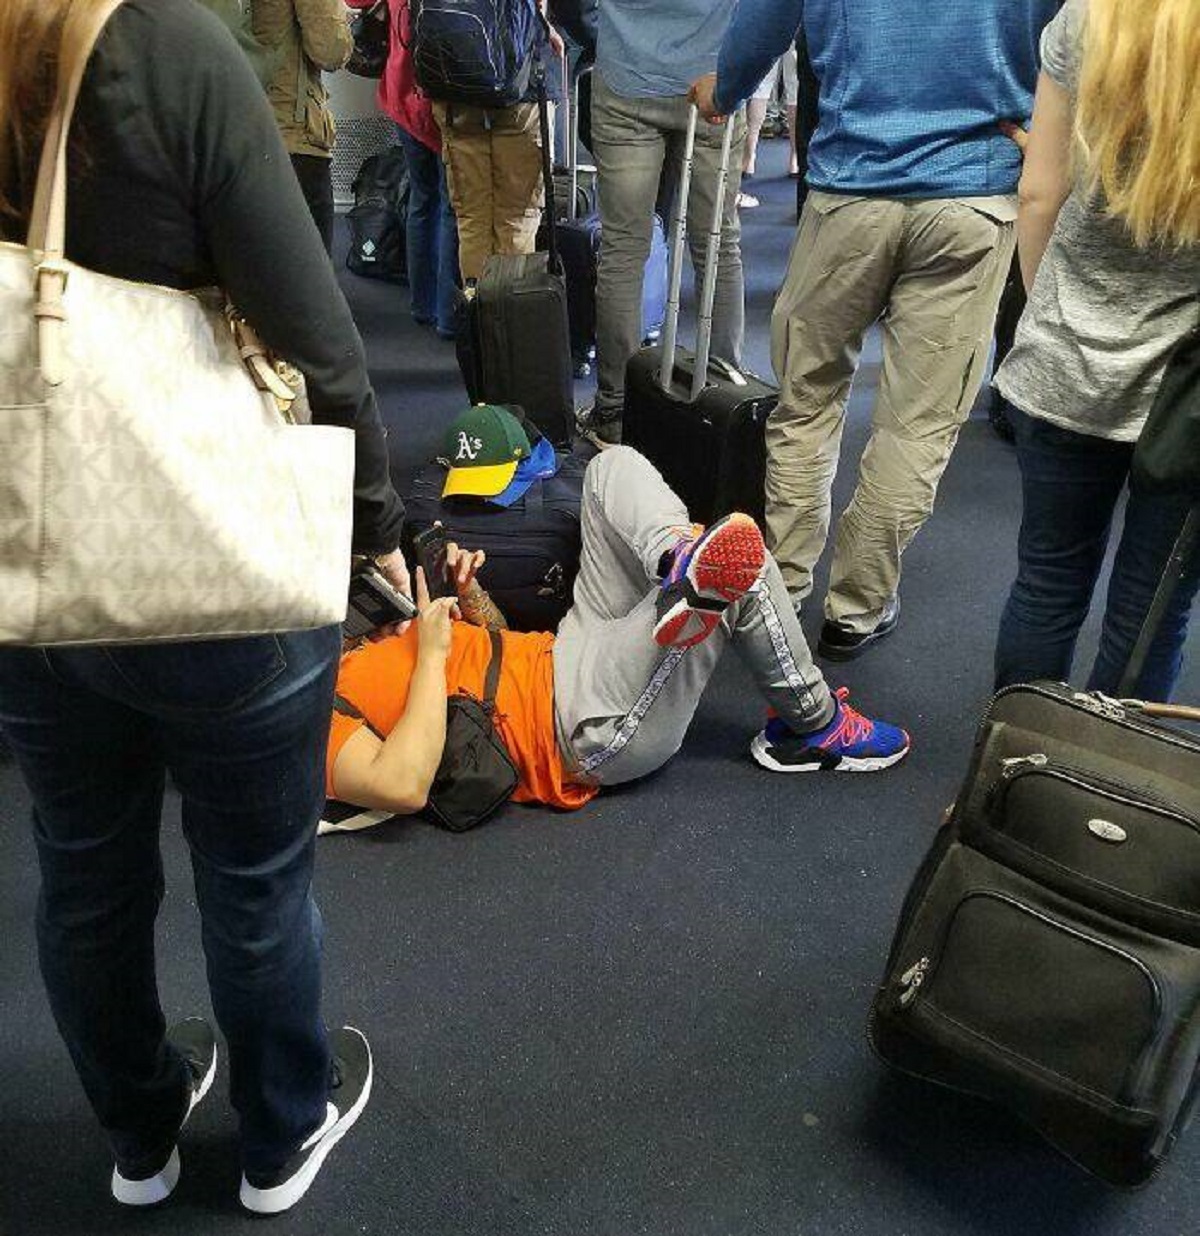 "This Guy Making Everyone Walk Around Him To Board Their Plane"